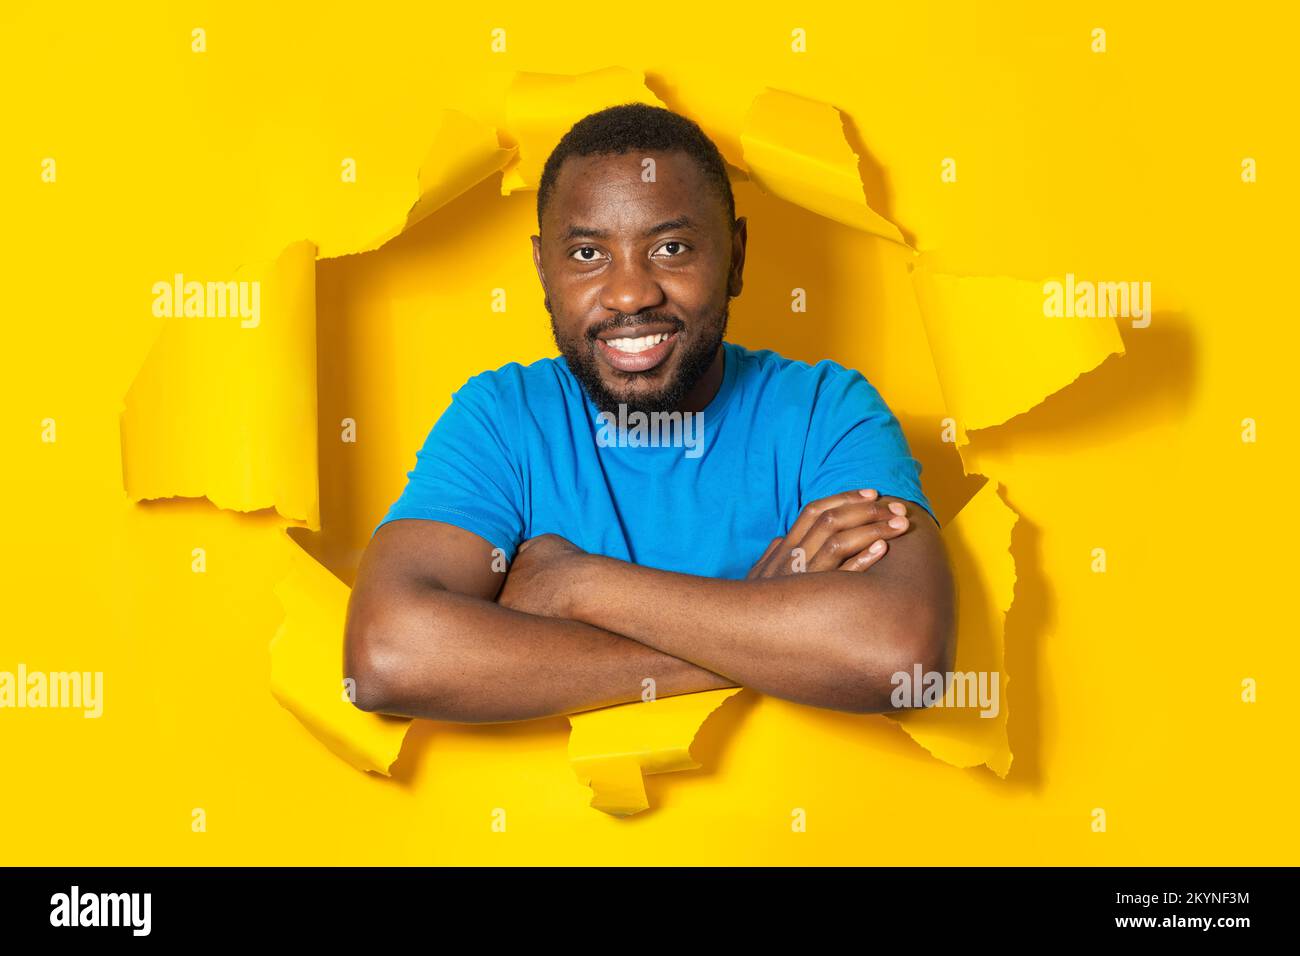 Portrait of positive black man posing with folded arms in torn paper hole, looking and smiling at camera Stock Photo